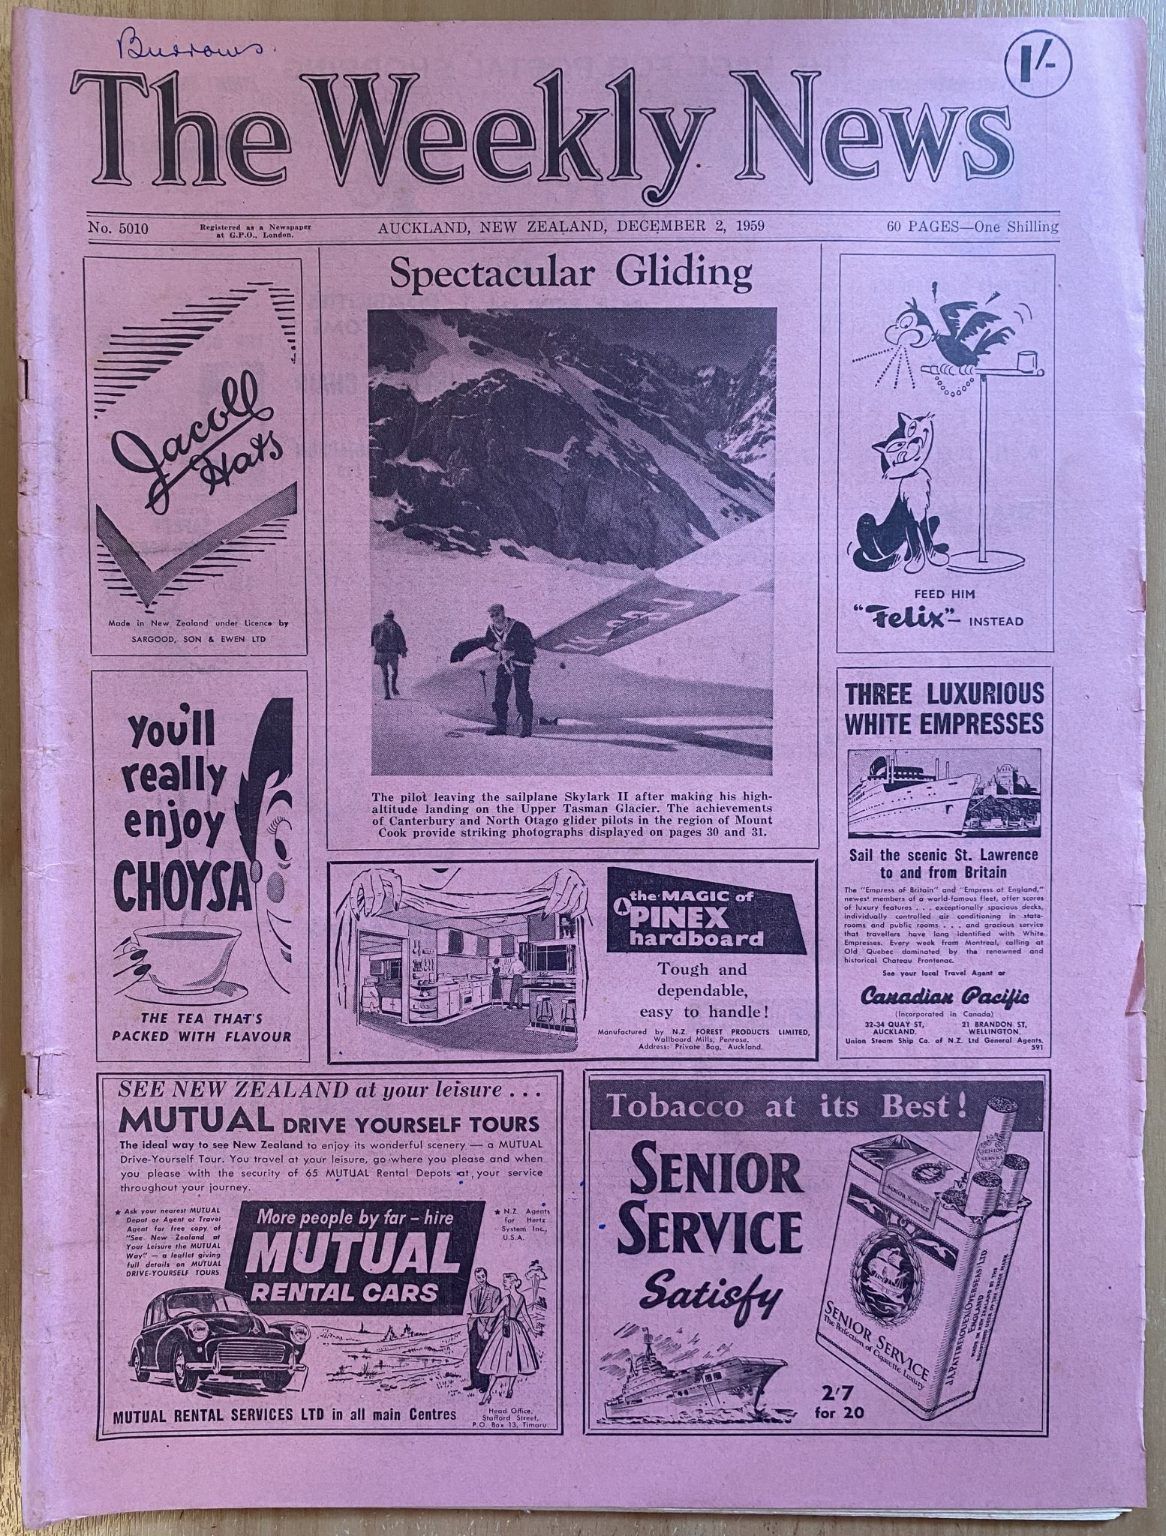 OLD NEWSPAPER: The Weekly News - No. 5010, 2 December 1959